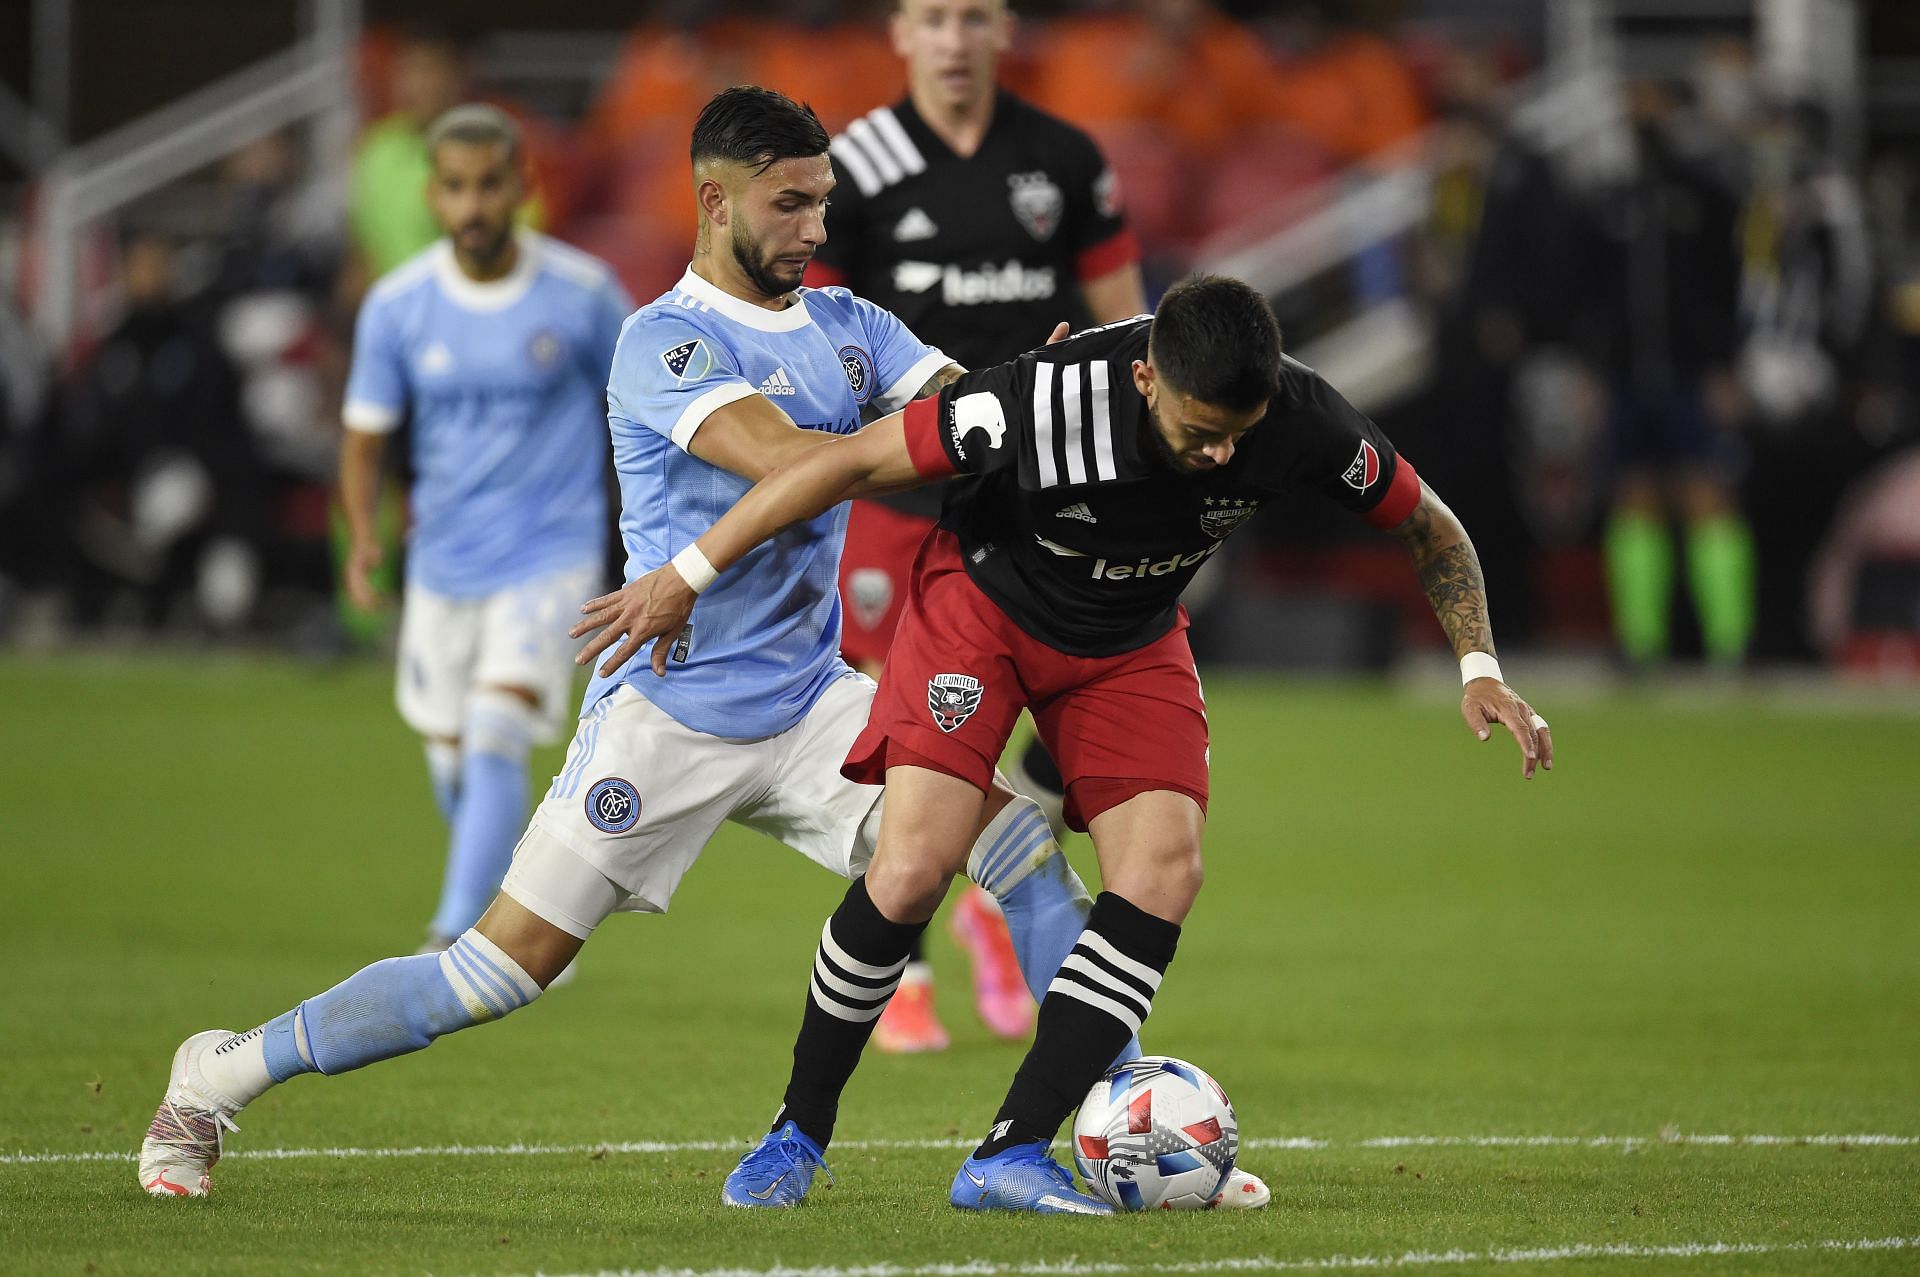 New York City FC take on DC United this weekend